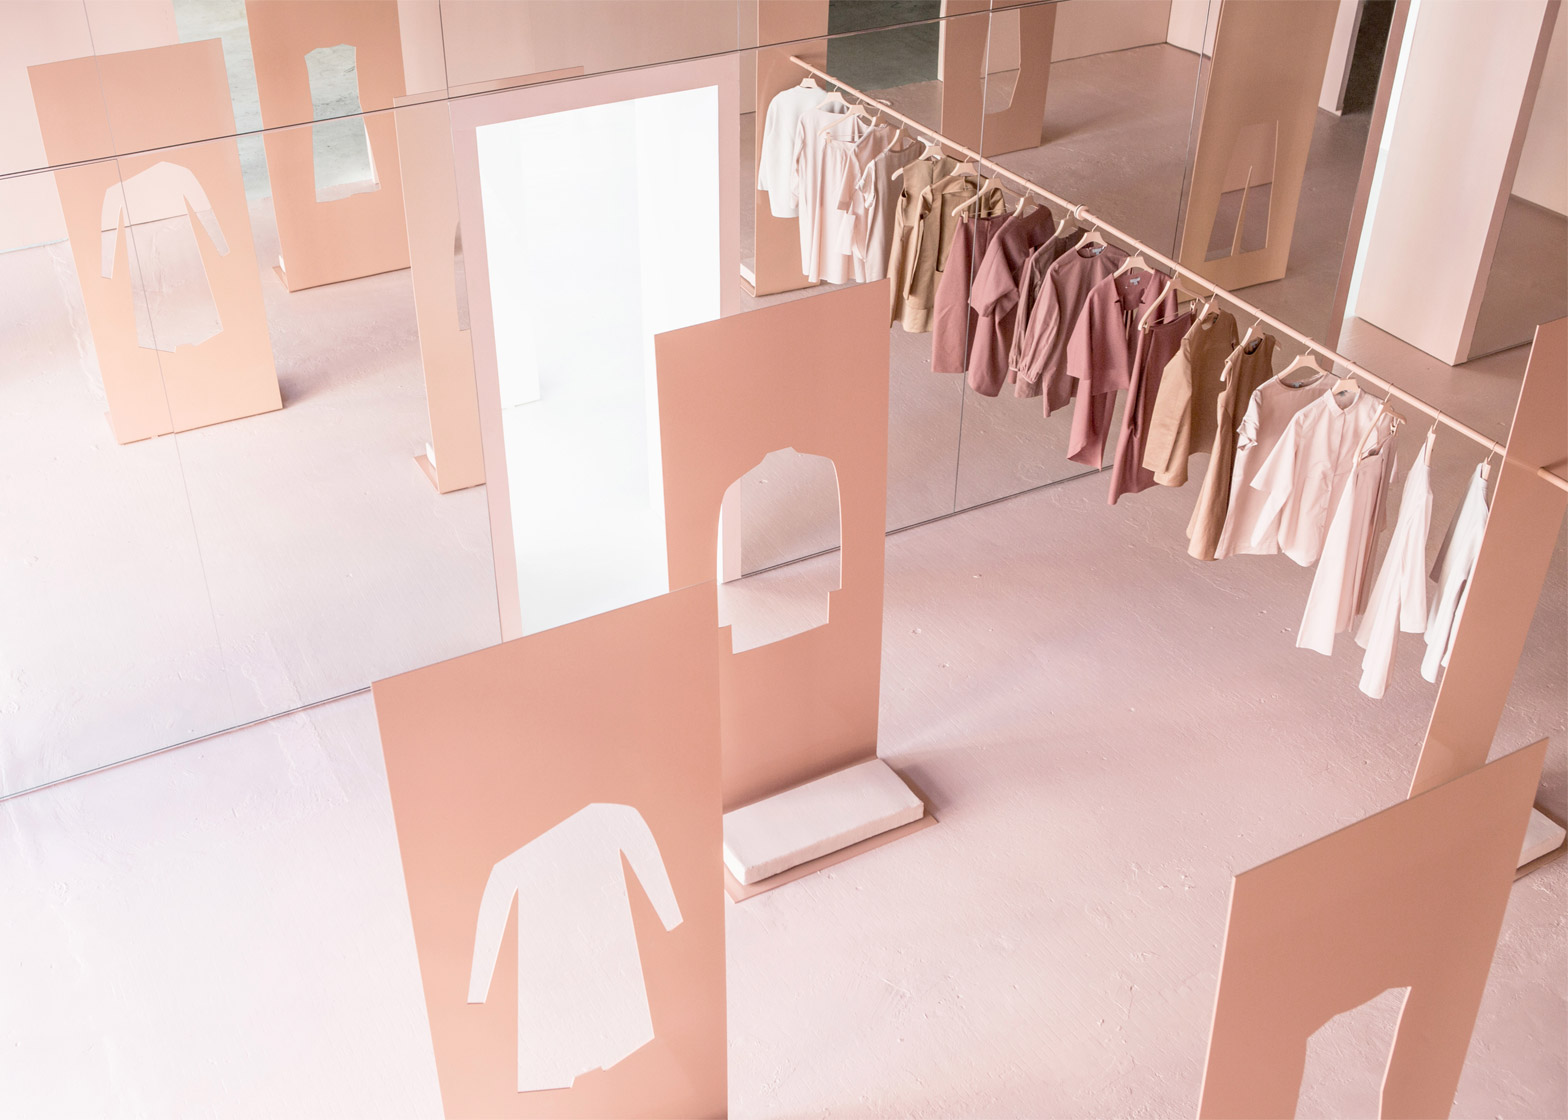 Snarkitecture uses and mirrors for COS pop-up store